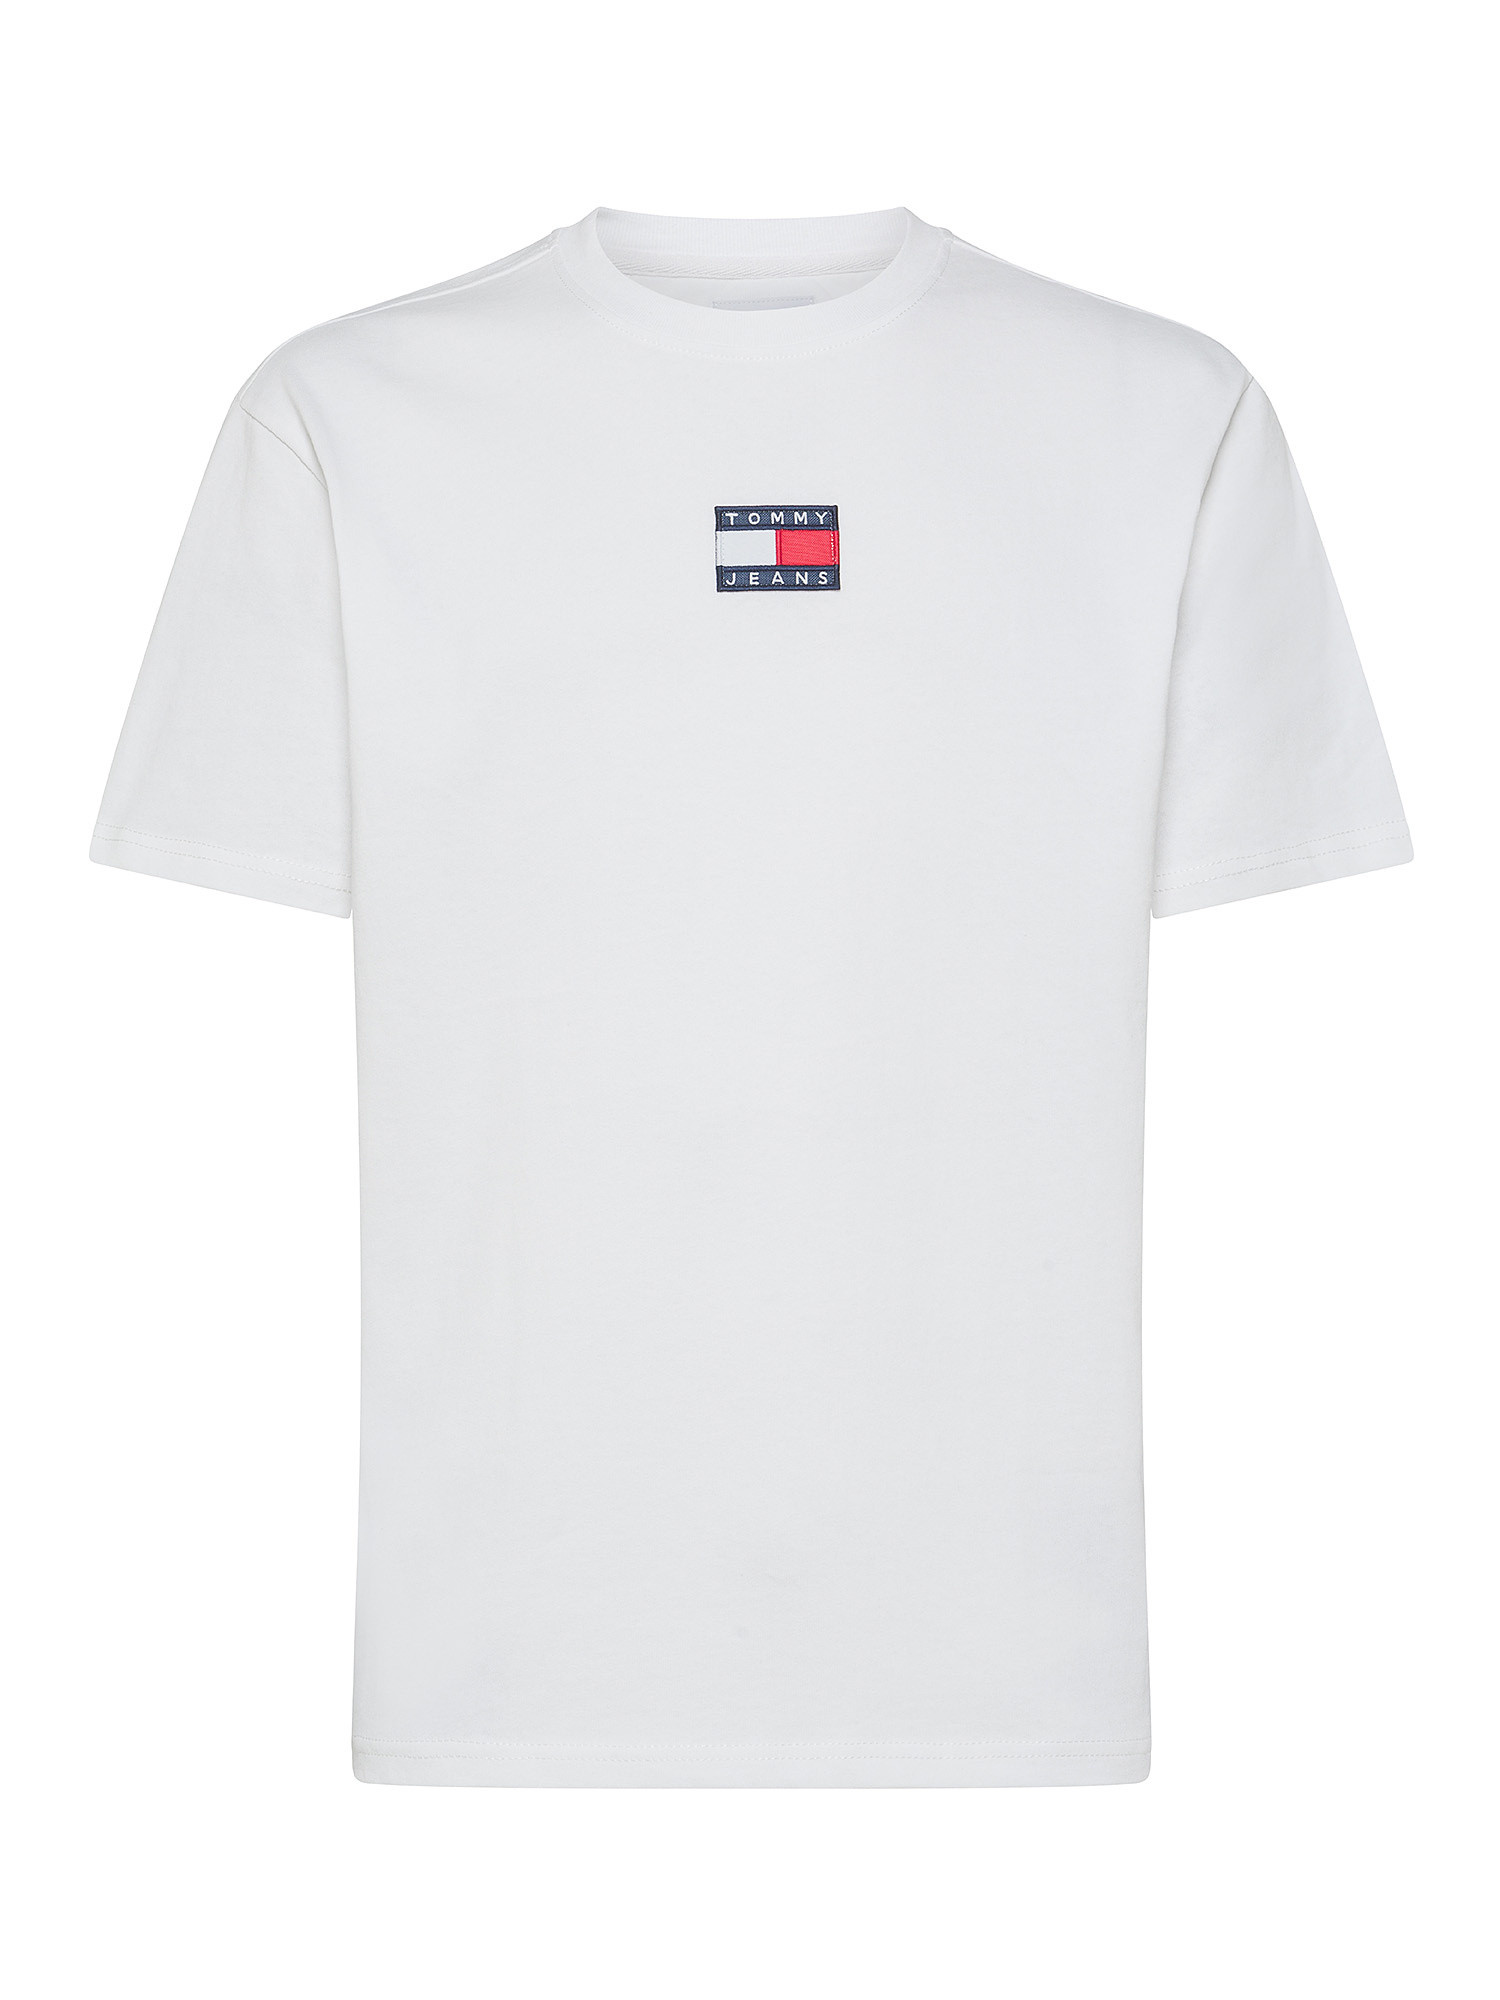 Tommy Jeans - T-shirt girocollo in cotone con micrologo, Bianco, large image number 0